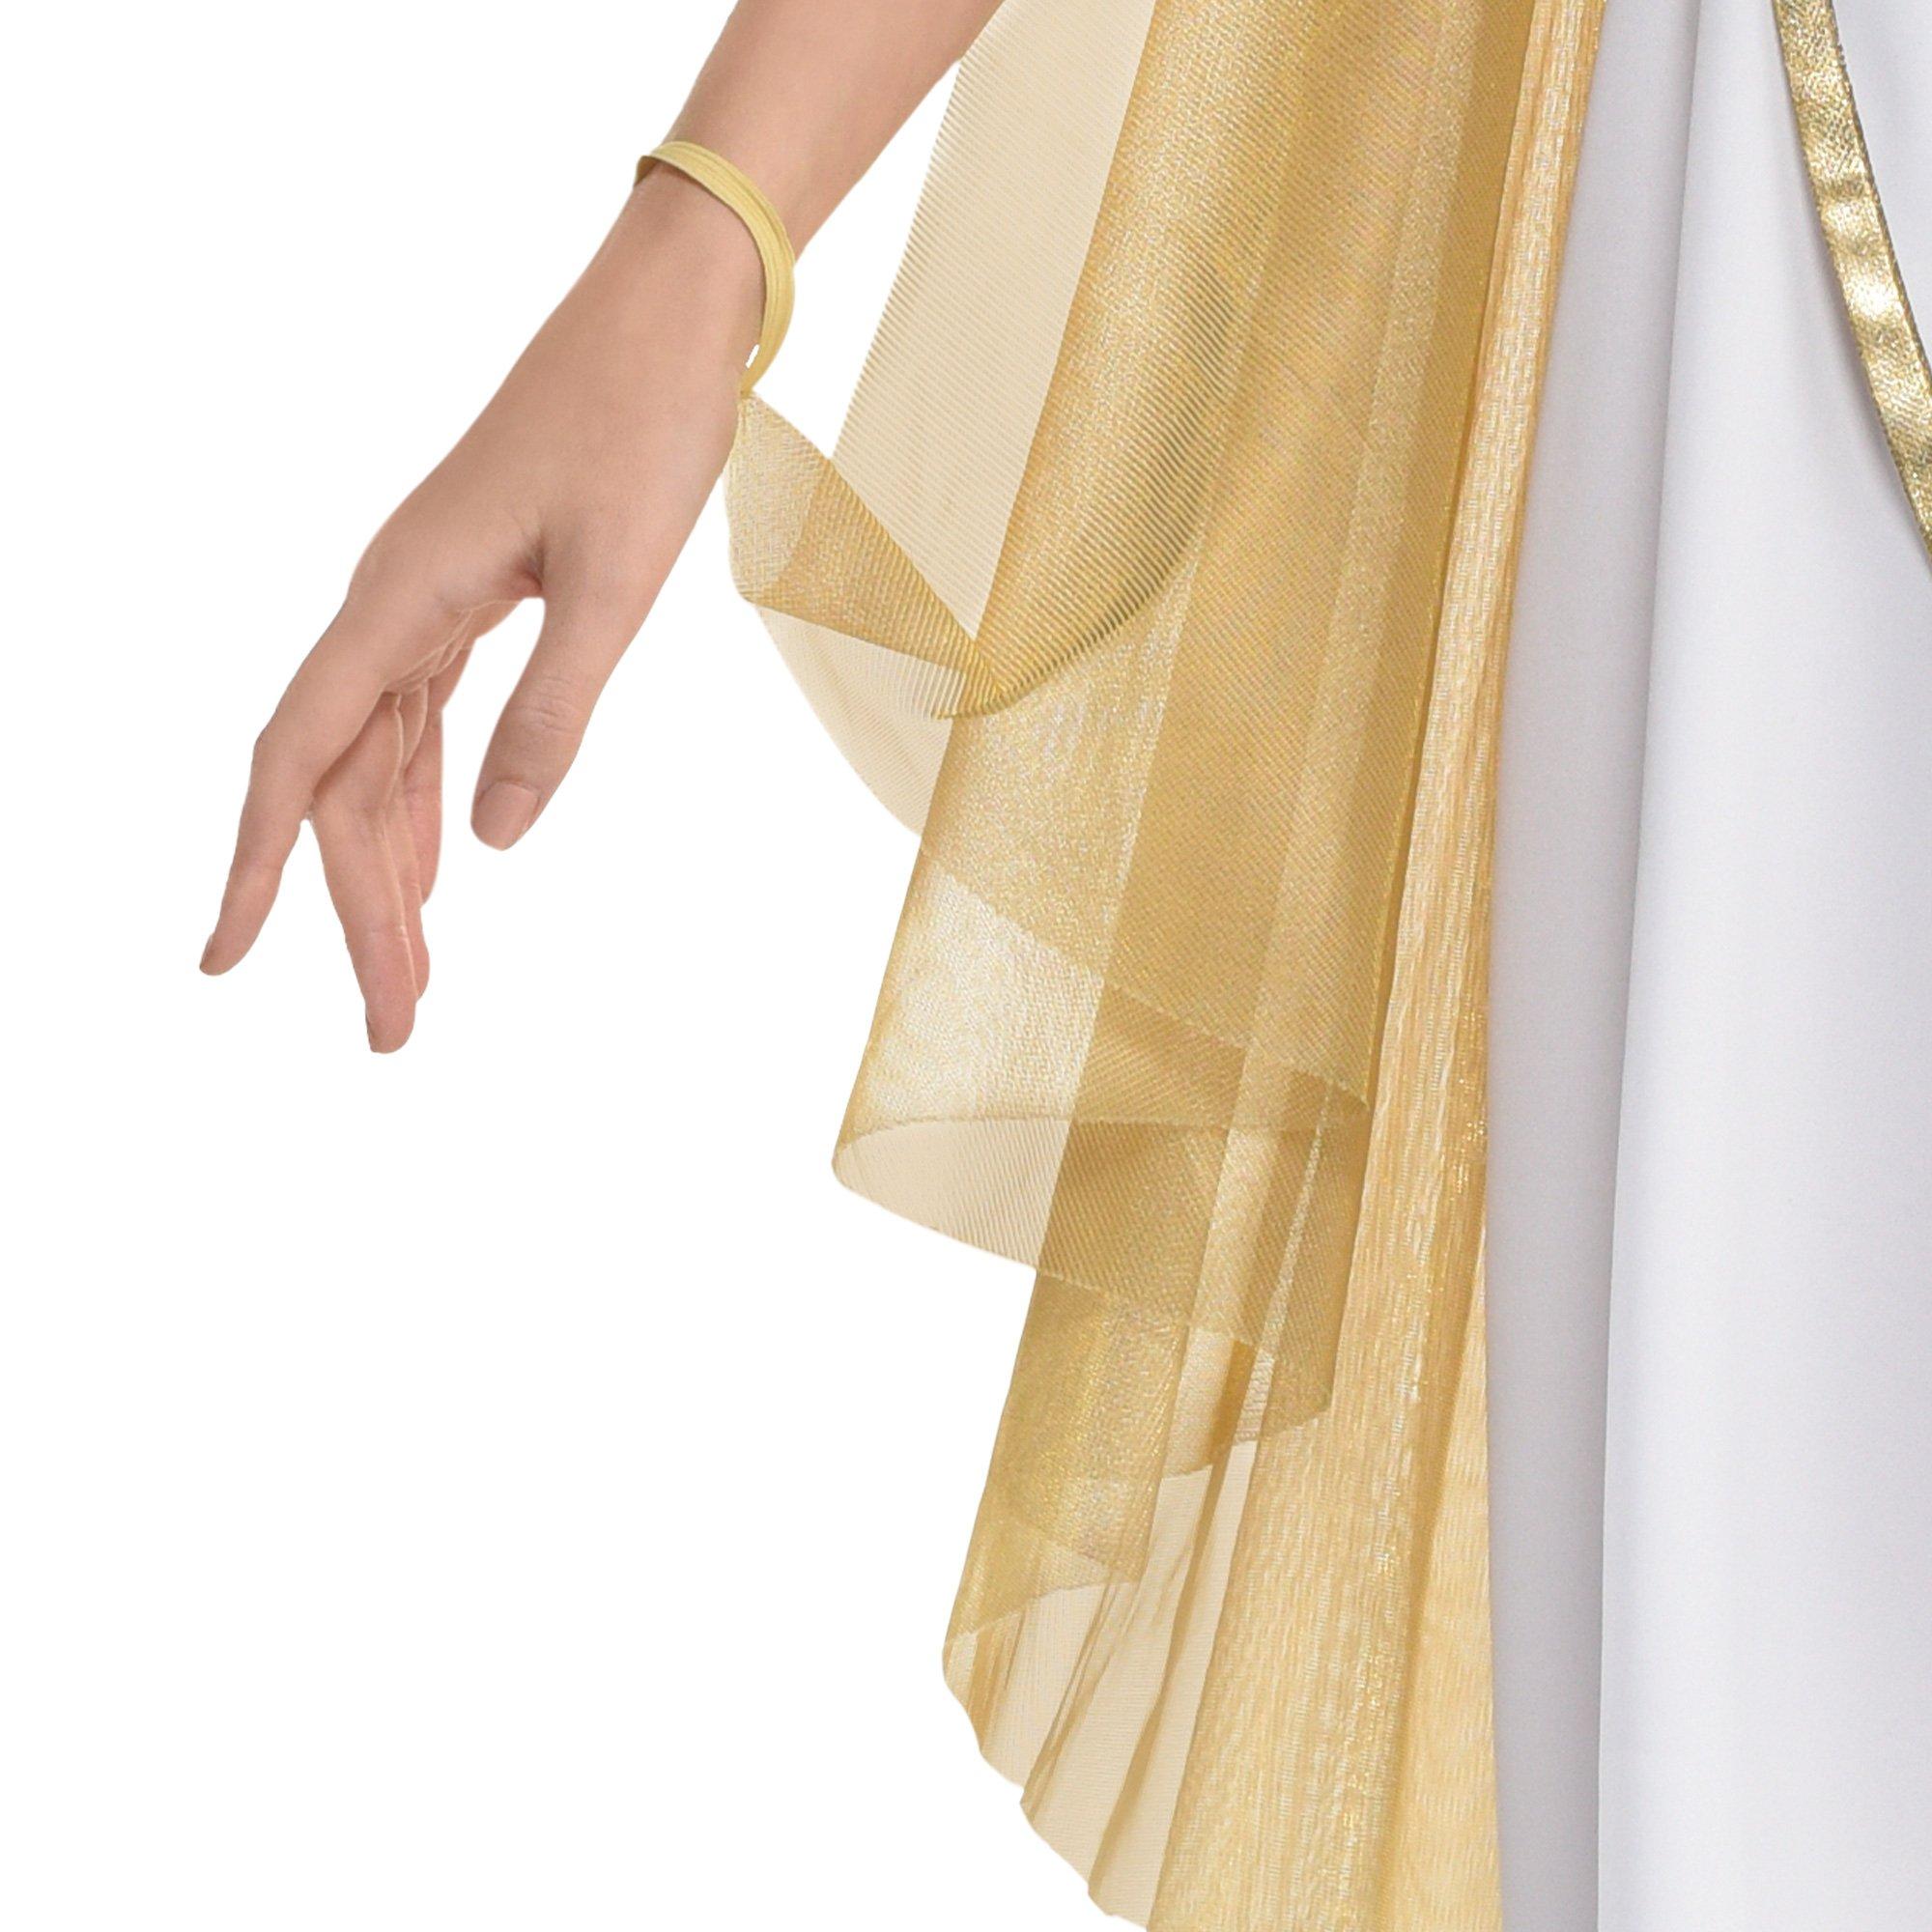 Greek Goddess Costume Accessory Kit for Adults